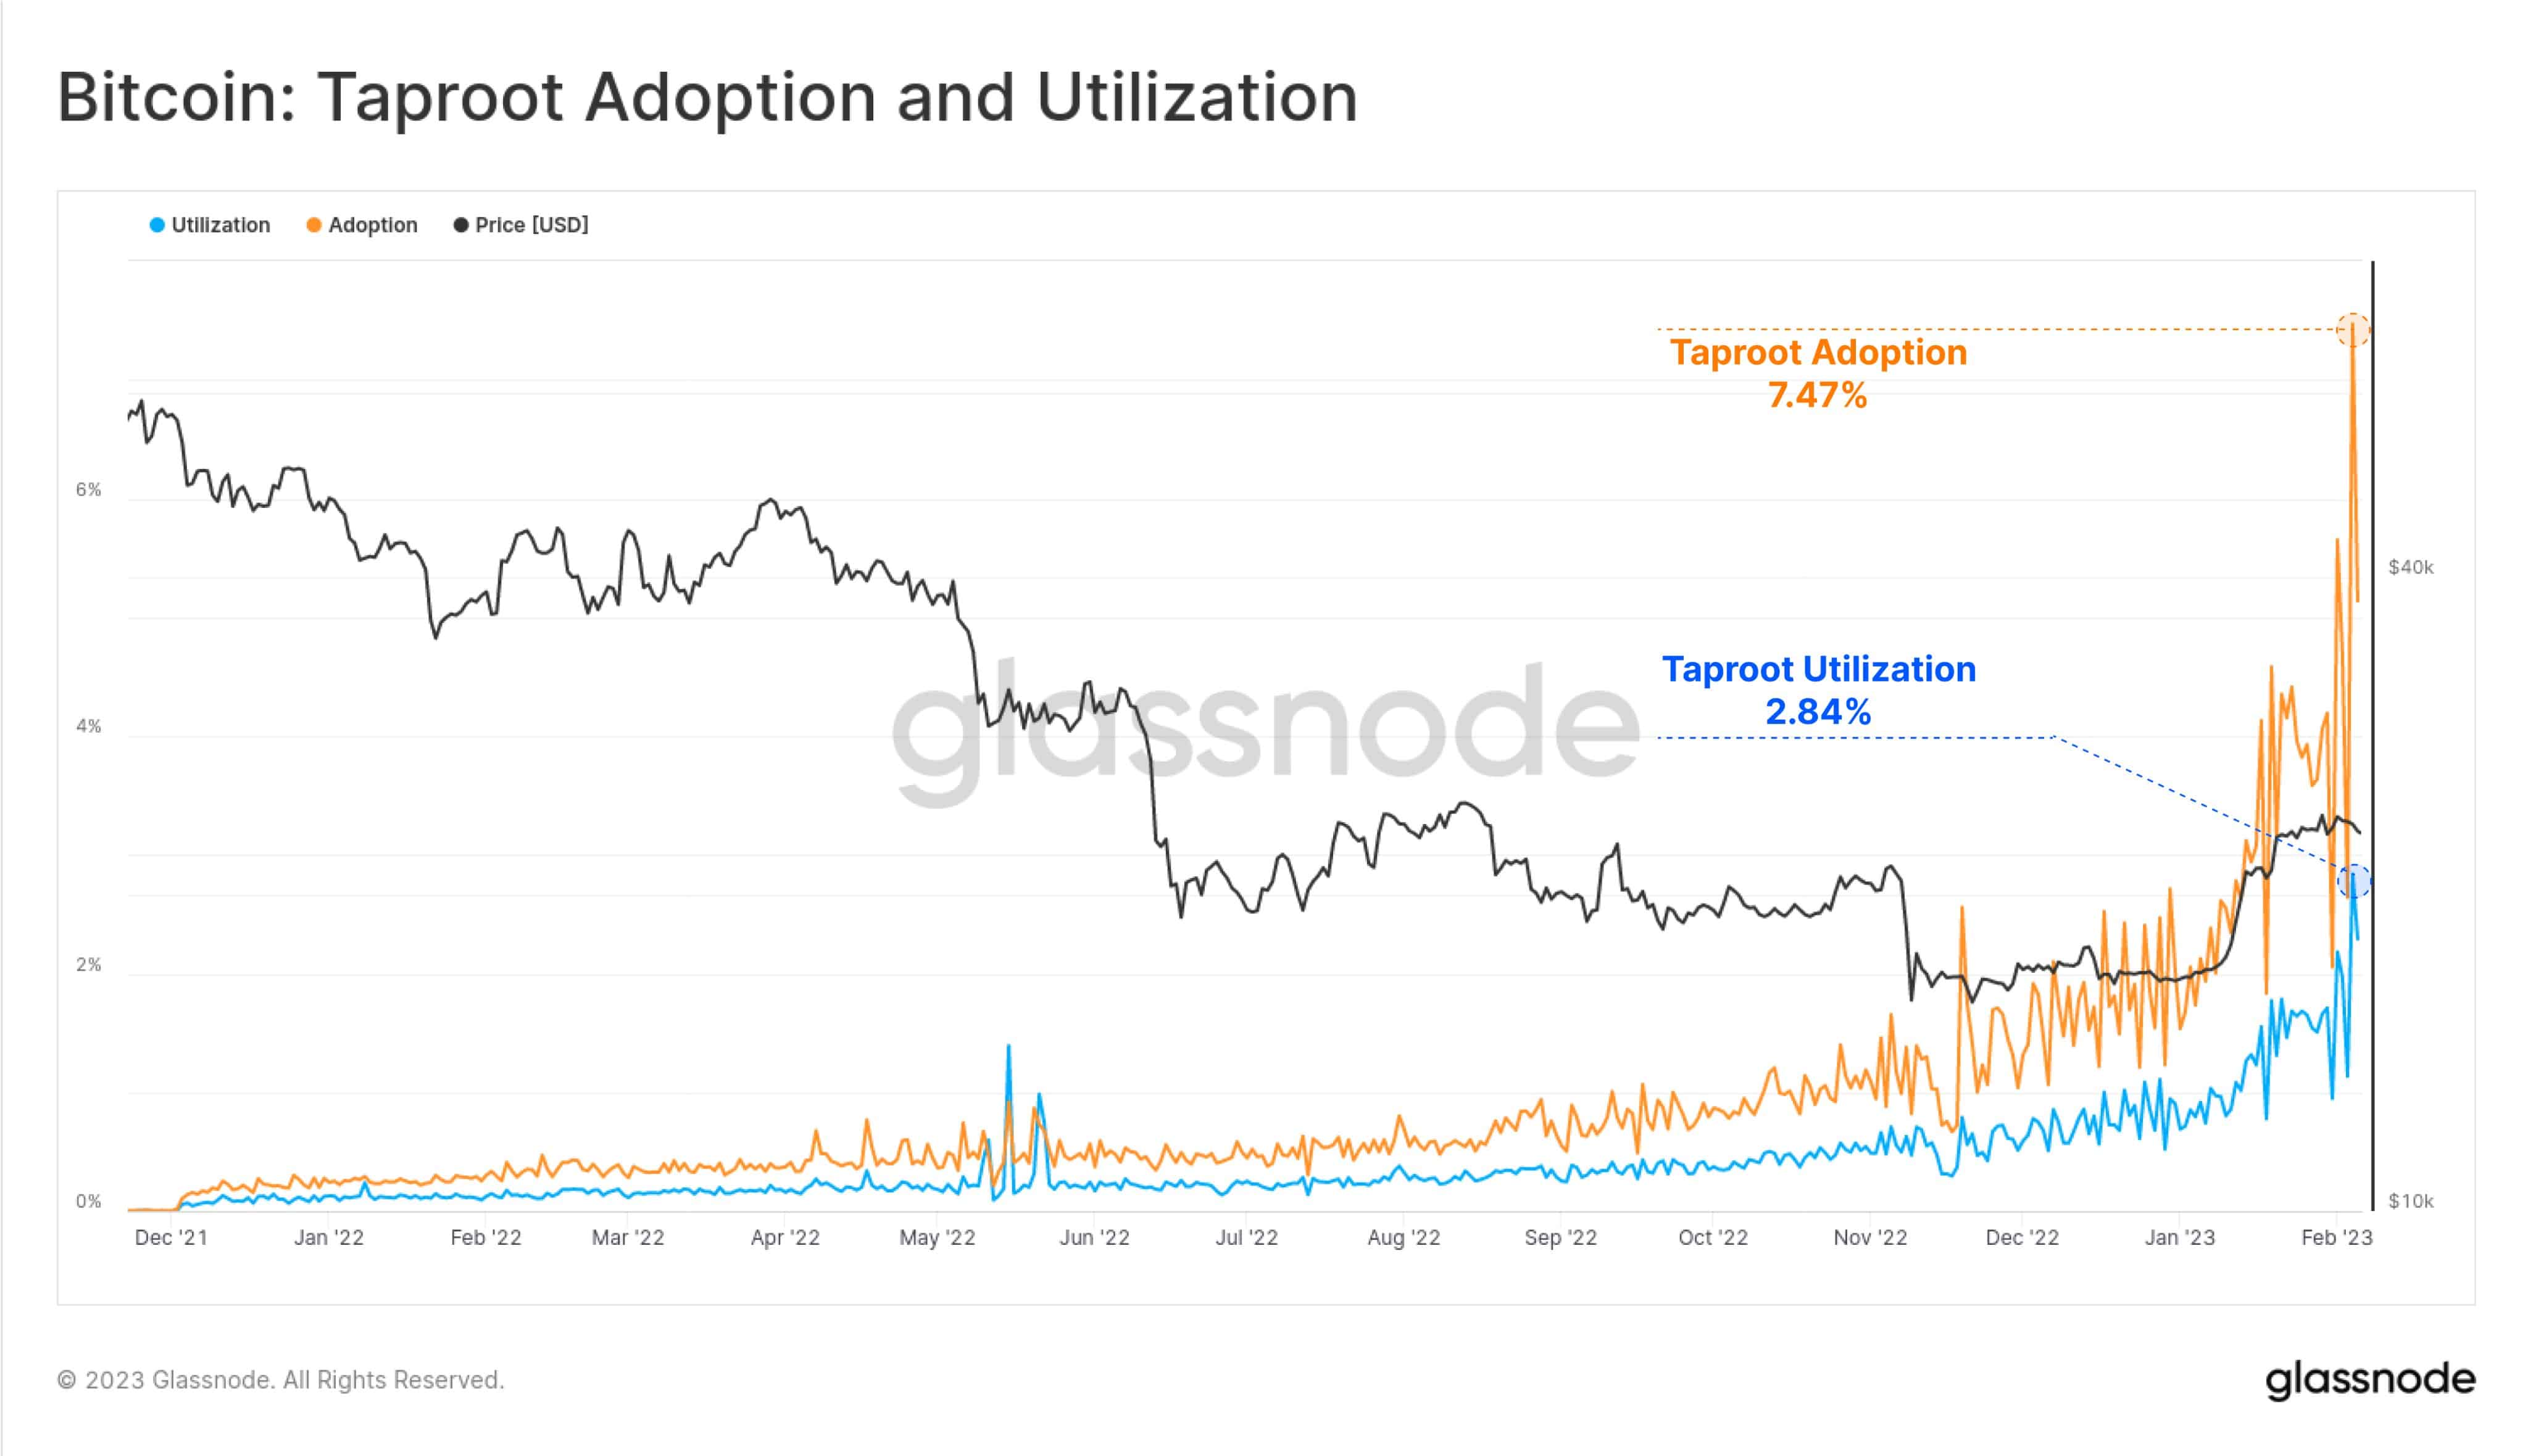 Bitcoin Taproot Adoption and Utilization